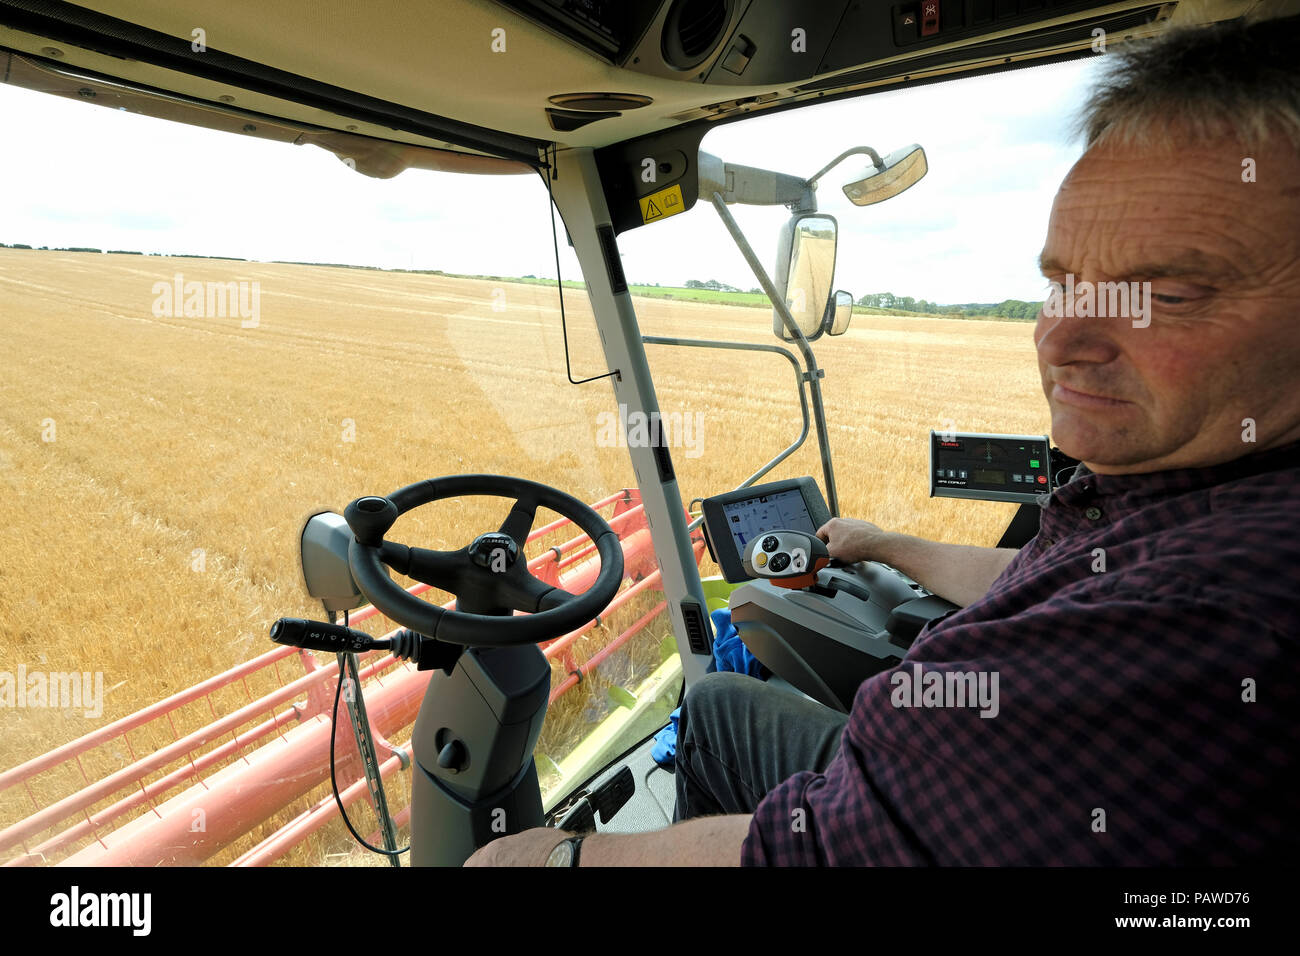 Kelso, Scotland, 25 July 2018.   Combine Harvester in Scottish Borders Tom Stewart from Sandyknowe Farm, near Kelso in the Scottish Borders, in a Claas Lexion 660 with Vario 770 cutterbar combine harvester, working in fields near his farm on Wednesday 25 July 2018.    (Photo by Rob Gray / Freelance) Credit: Rob Gray/Alamy Live News Stock Photo